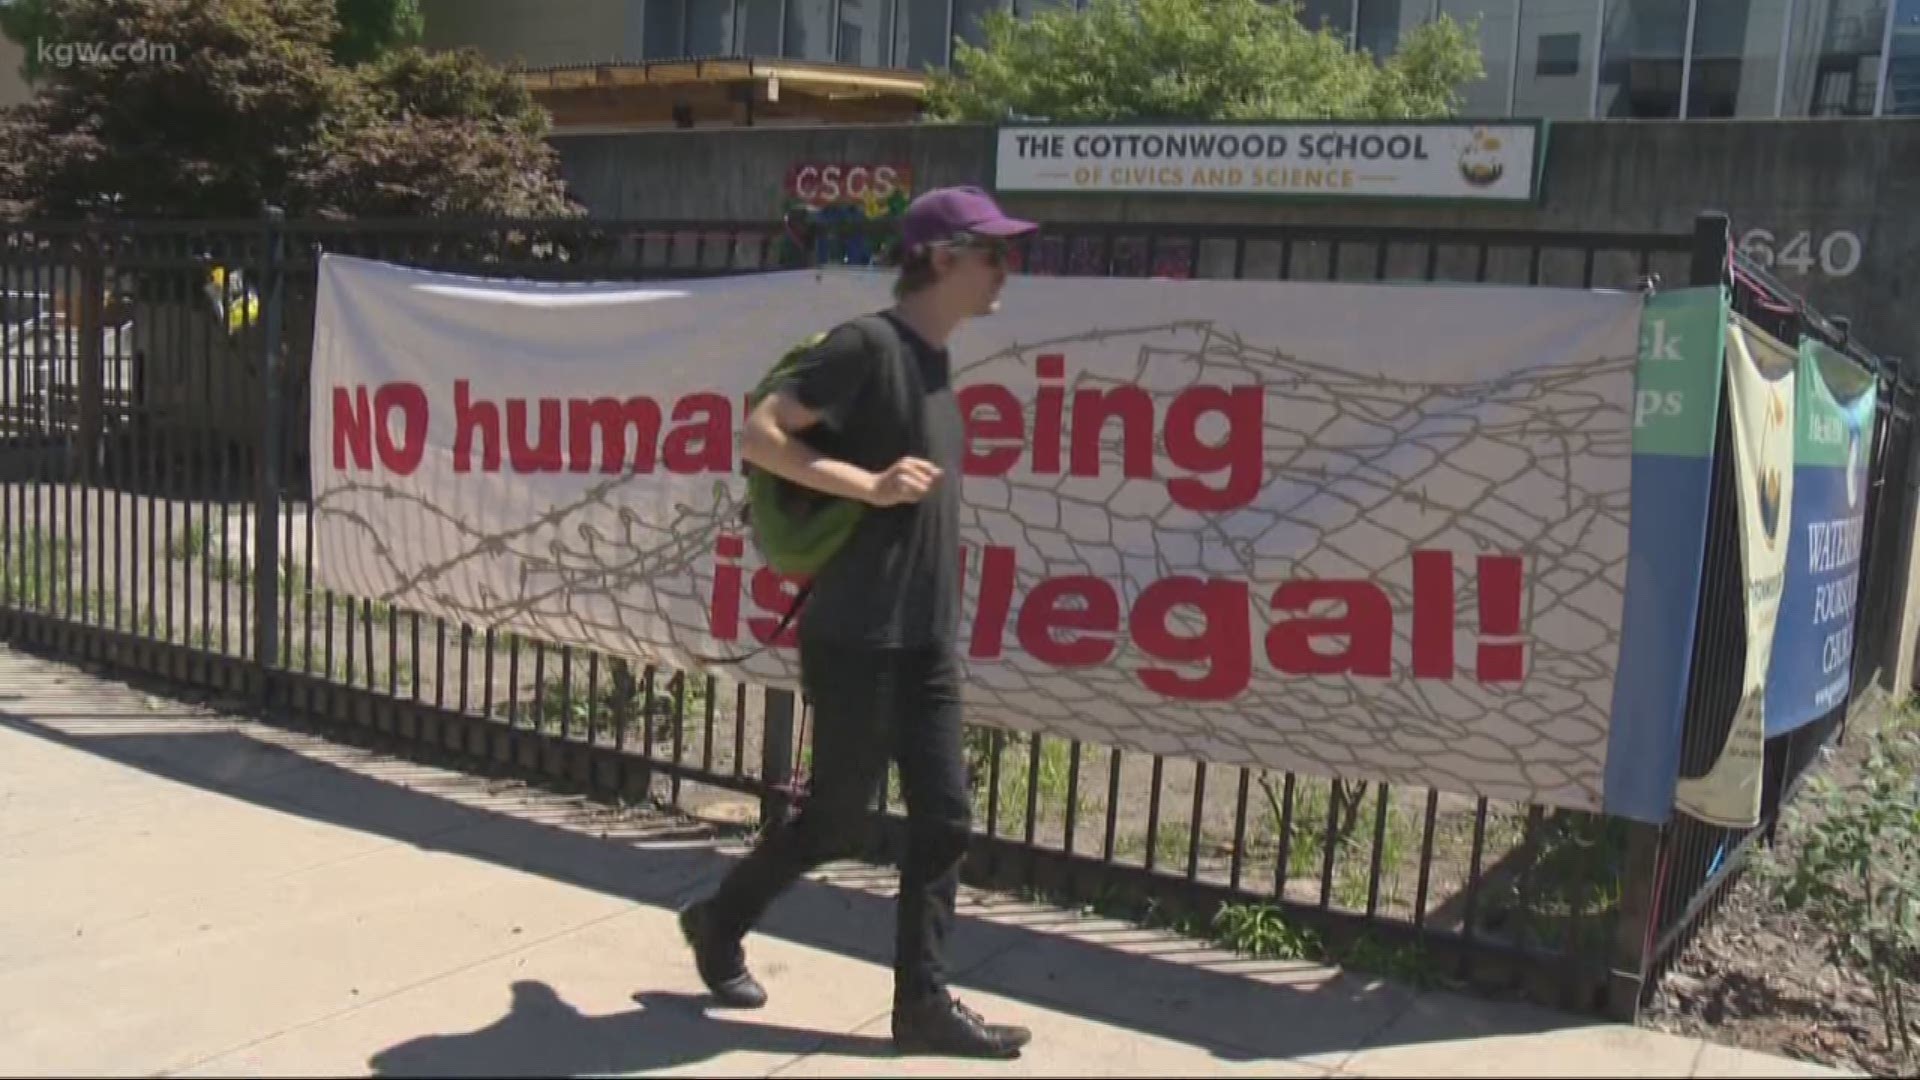 For the second time this week, protesters met in front of the Portland ICE detention facility in the south waterfront.